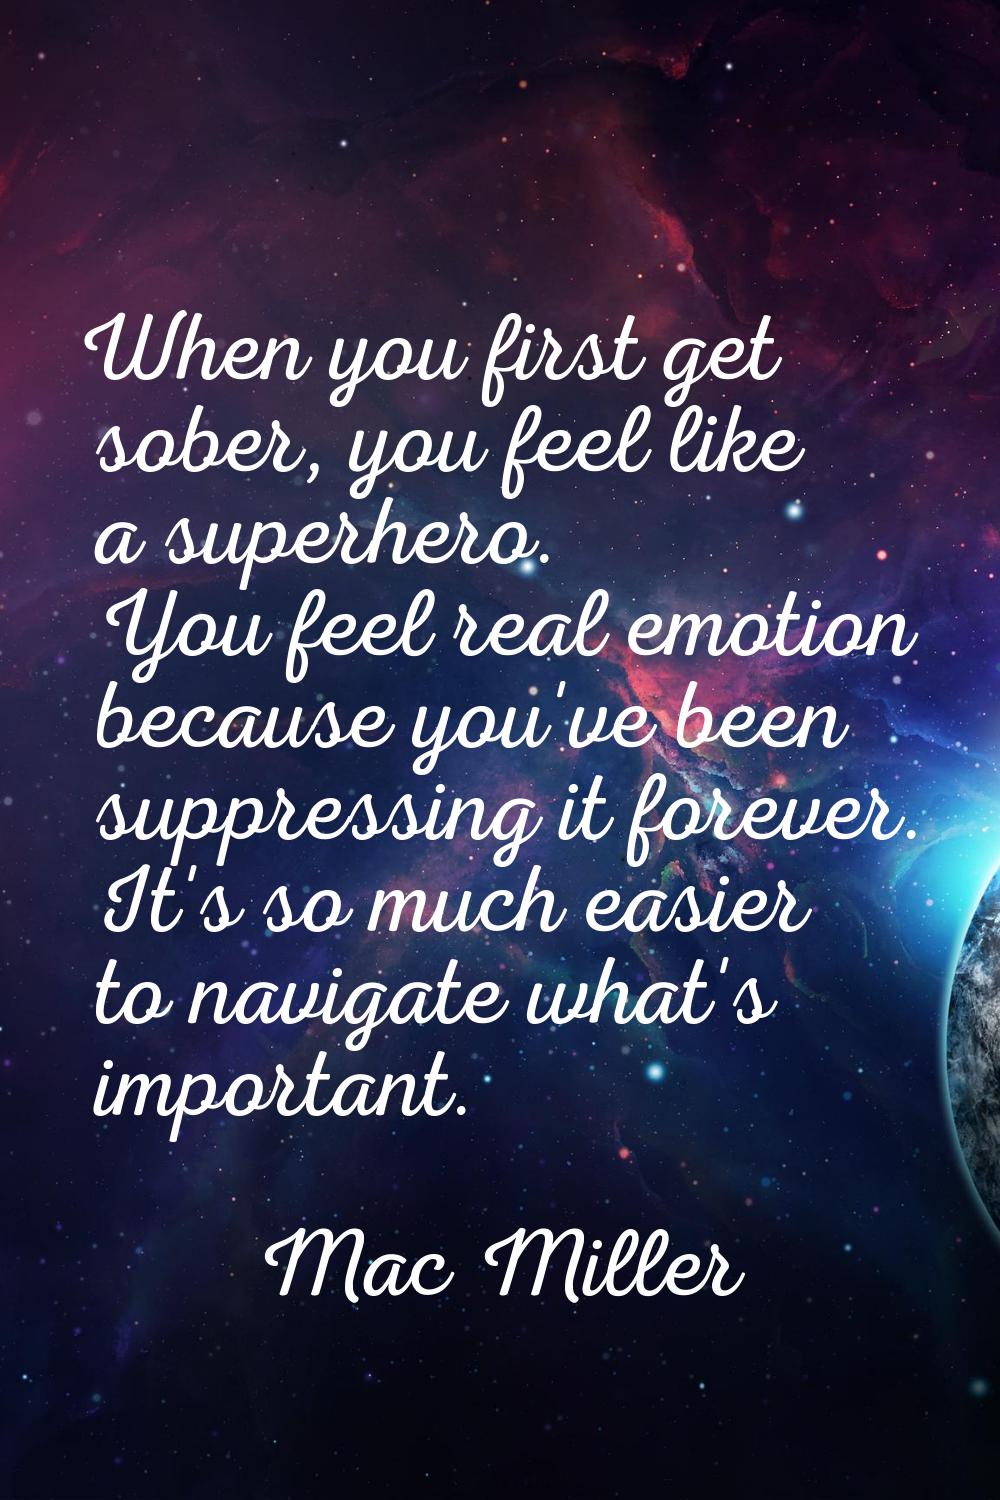 When you first get sober, you feel like a superhero. You feel real emotion because you've been supp